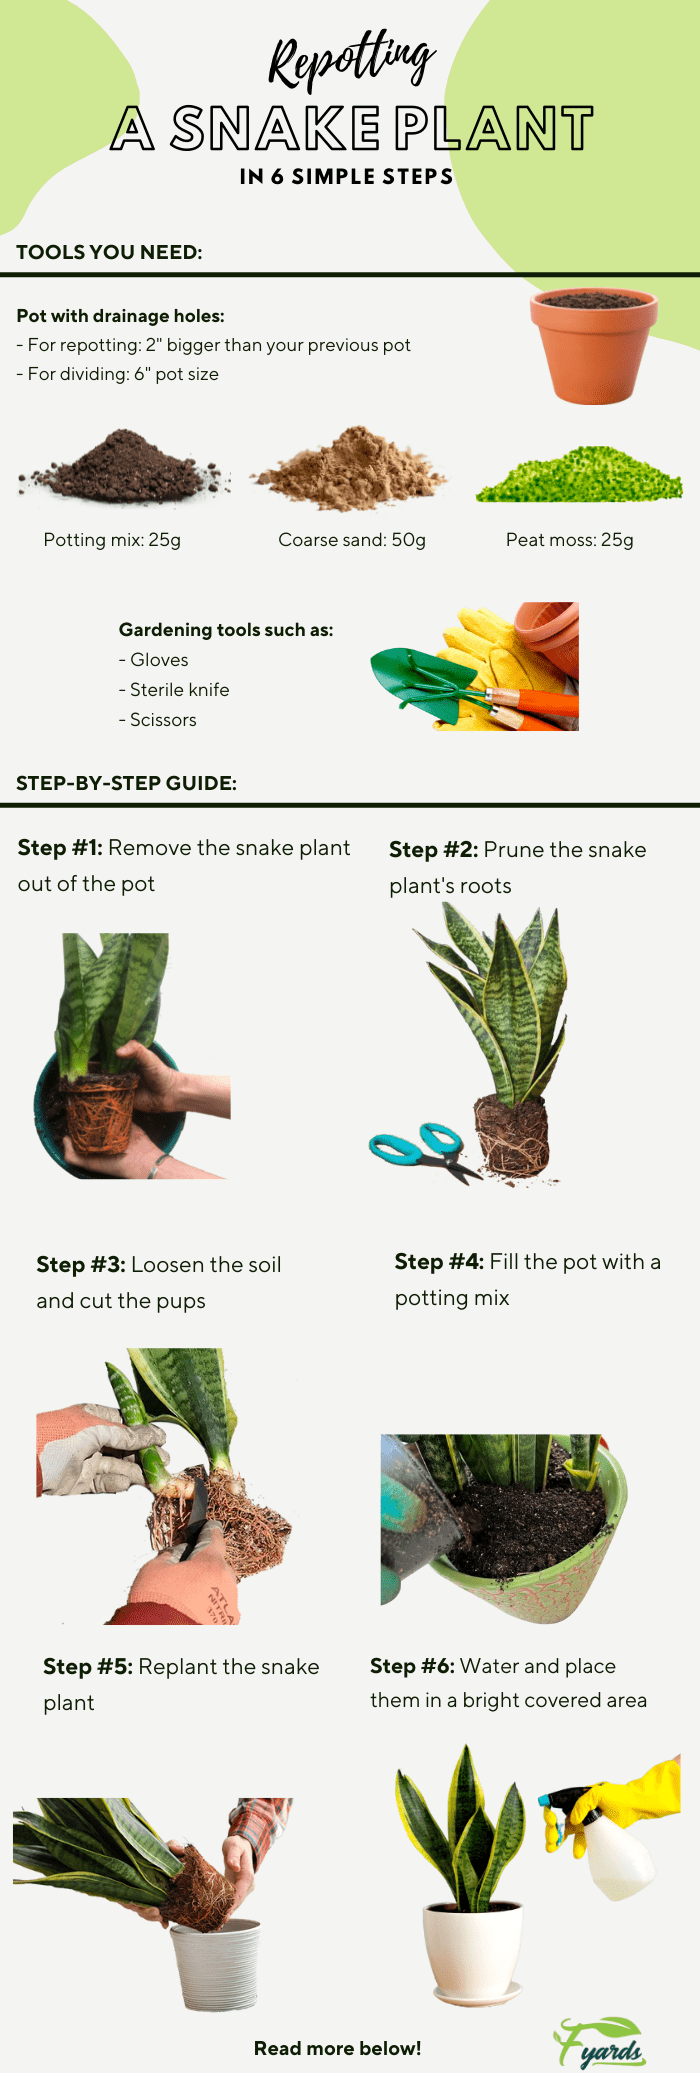 repot-a-snake-plant-without-killing-it